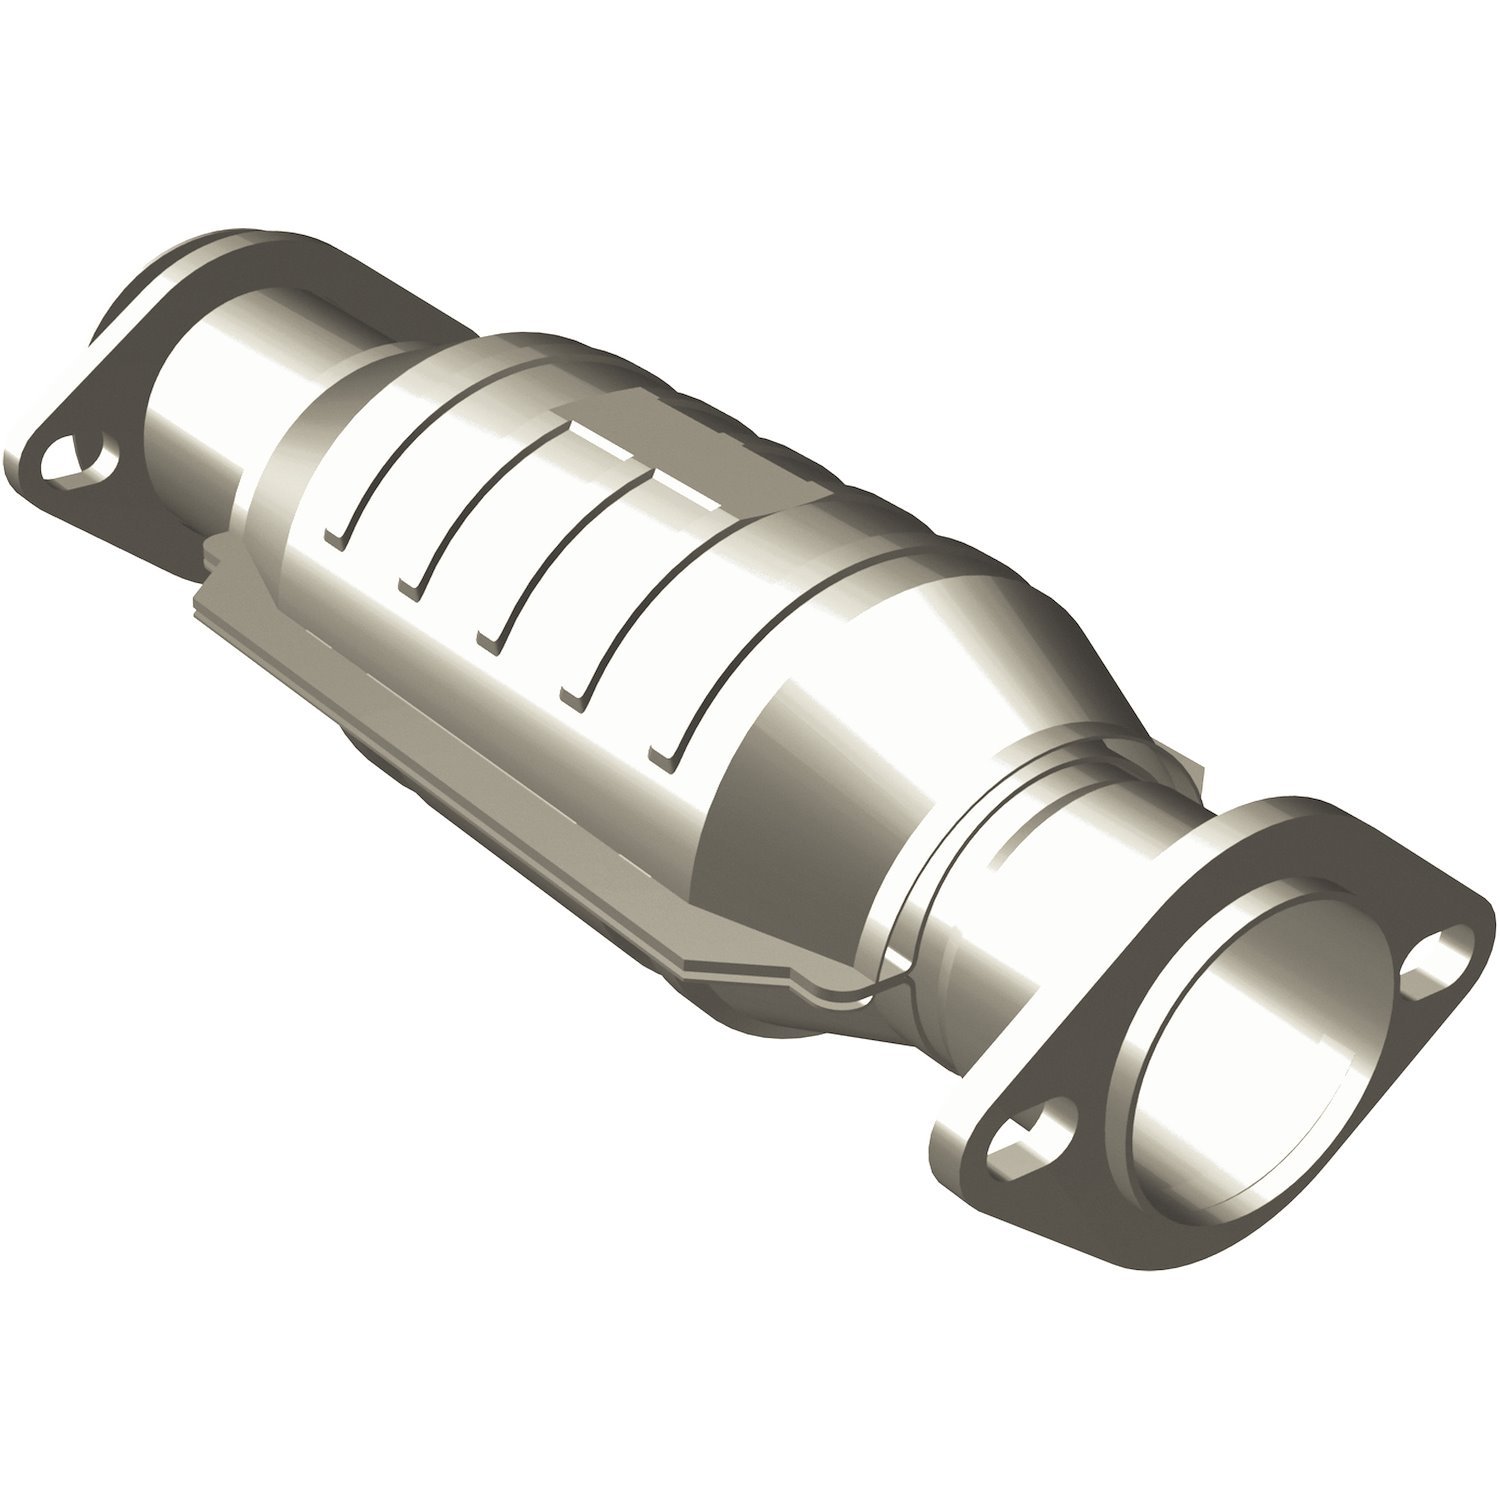 2001-2002 Mitsubishi Mirage OEM Grade Federal / EPA Compliant Direct-Fit Catalytic Converter